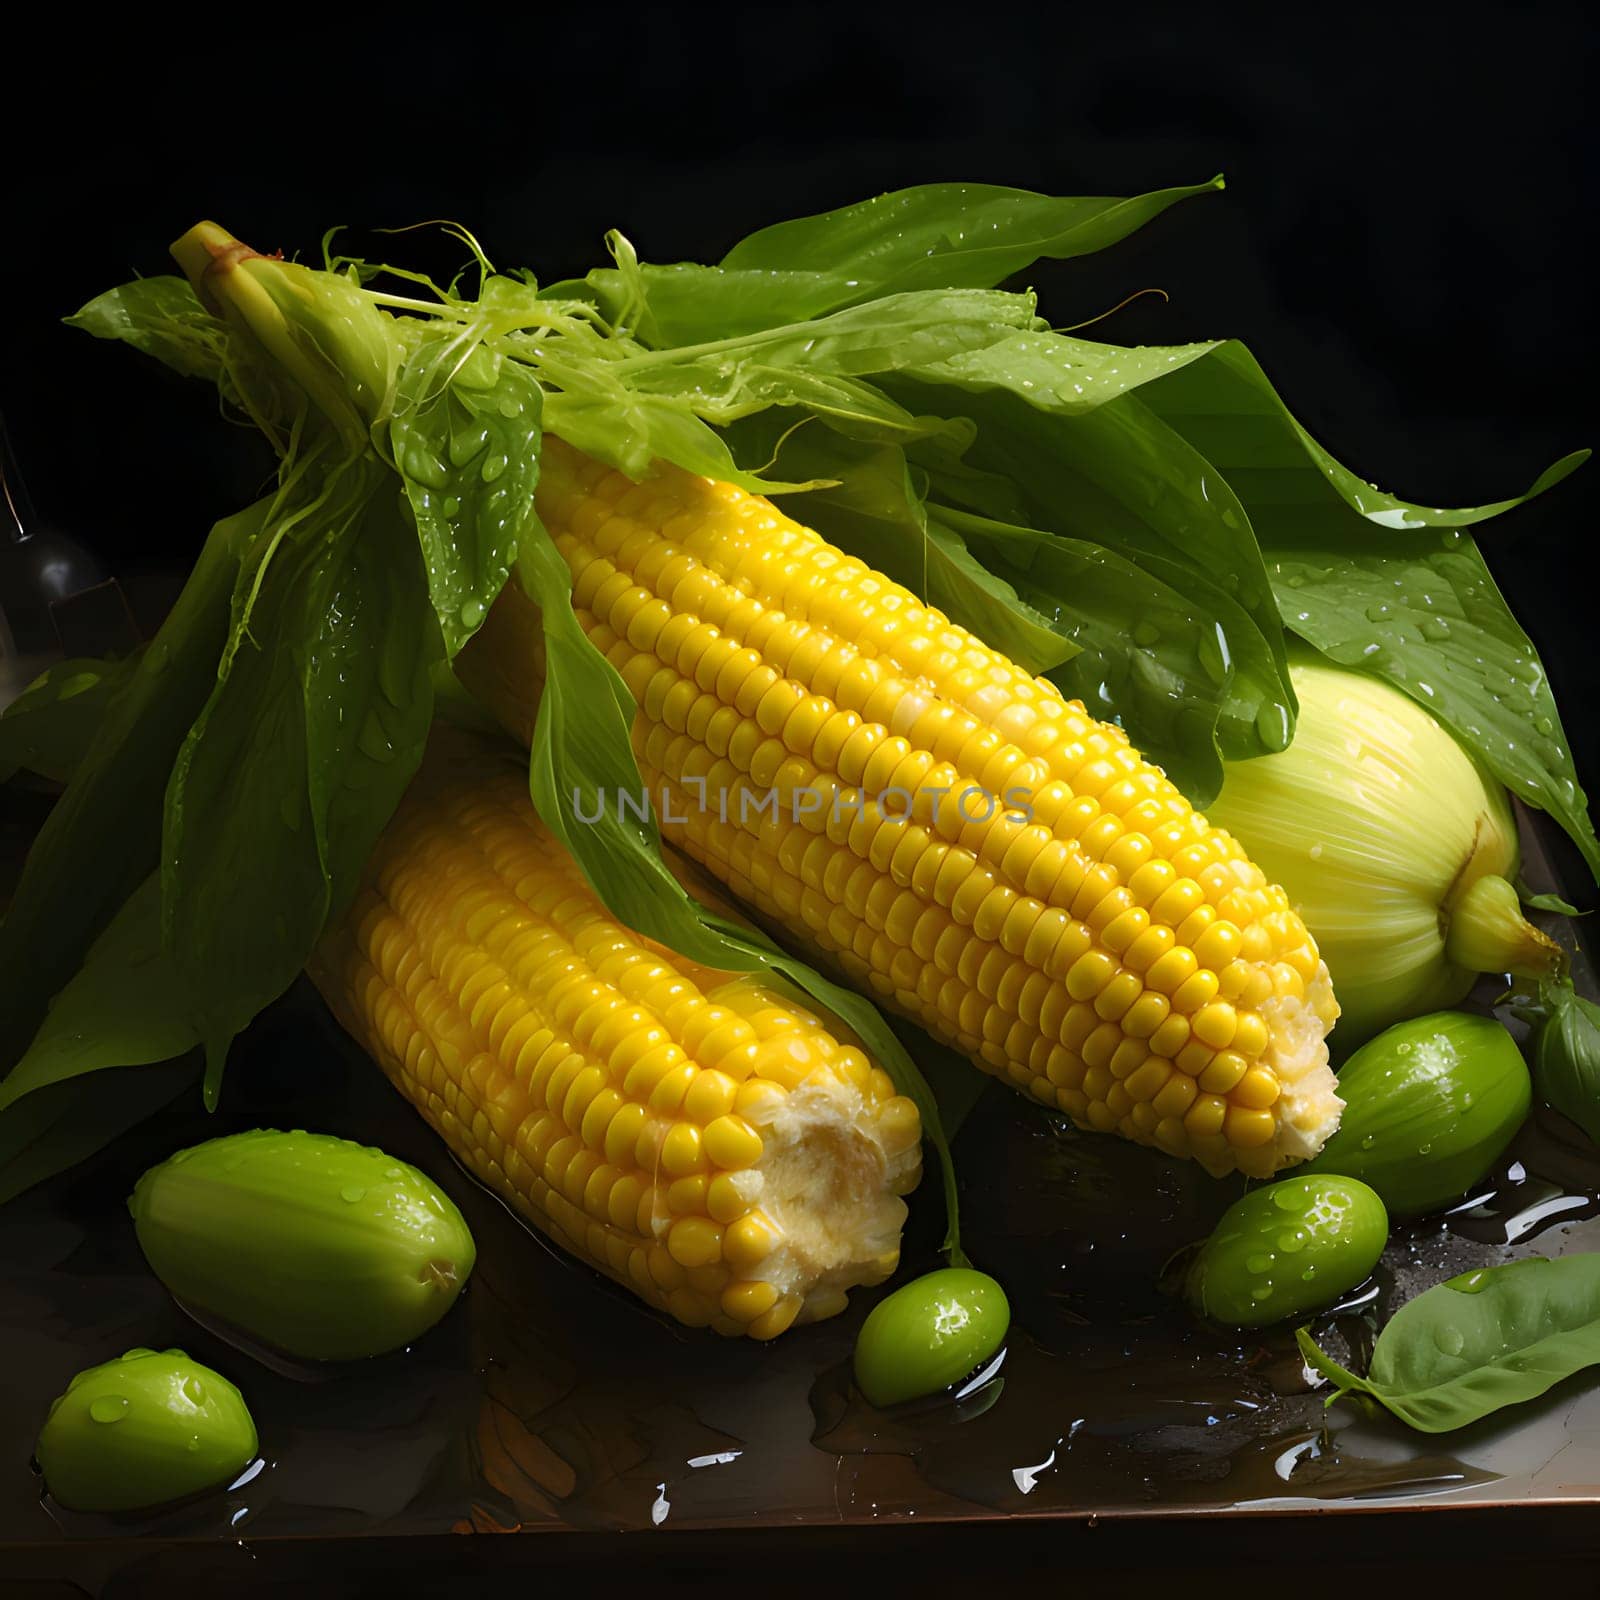 Two yellow corn cobs in leaf green on black background around water. Corn as a dish of thanksgiving for the harvest. An atmosphere of joy and celebration.